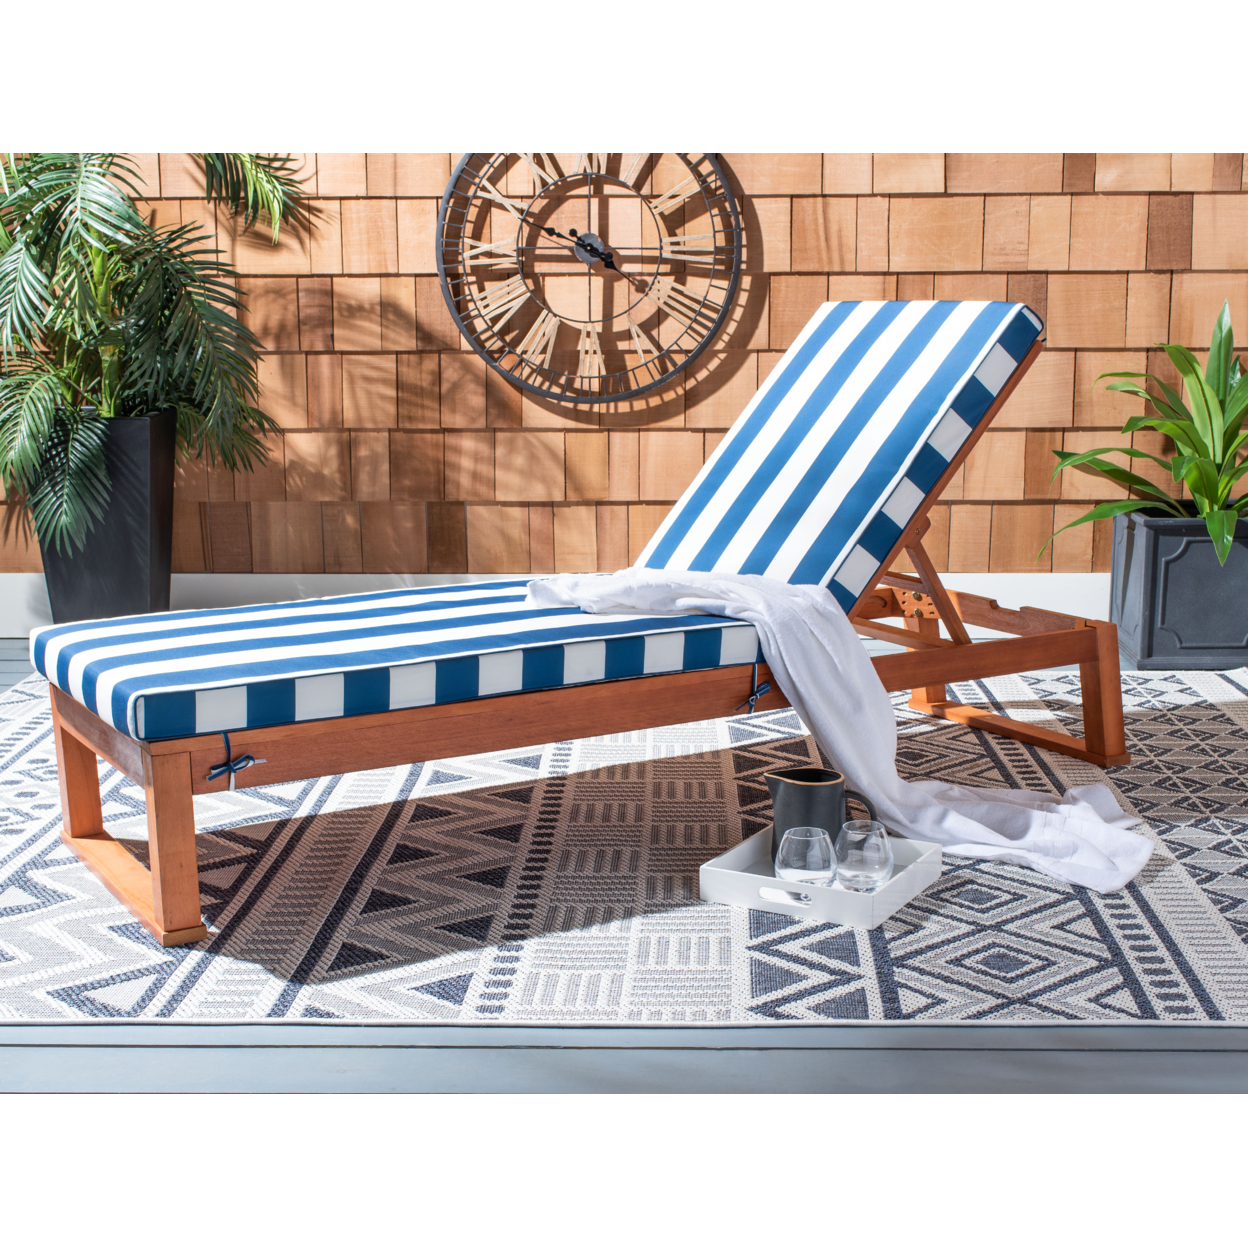 SAFAVIEH Outdoor Collection Solano Chaise Sunlounger Natural/Navy